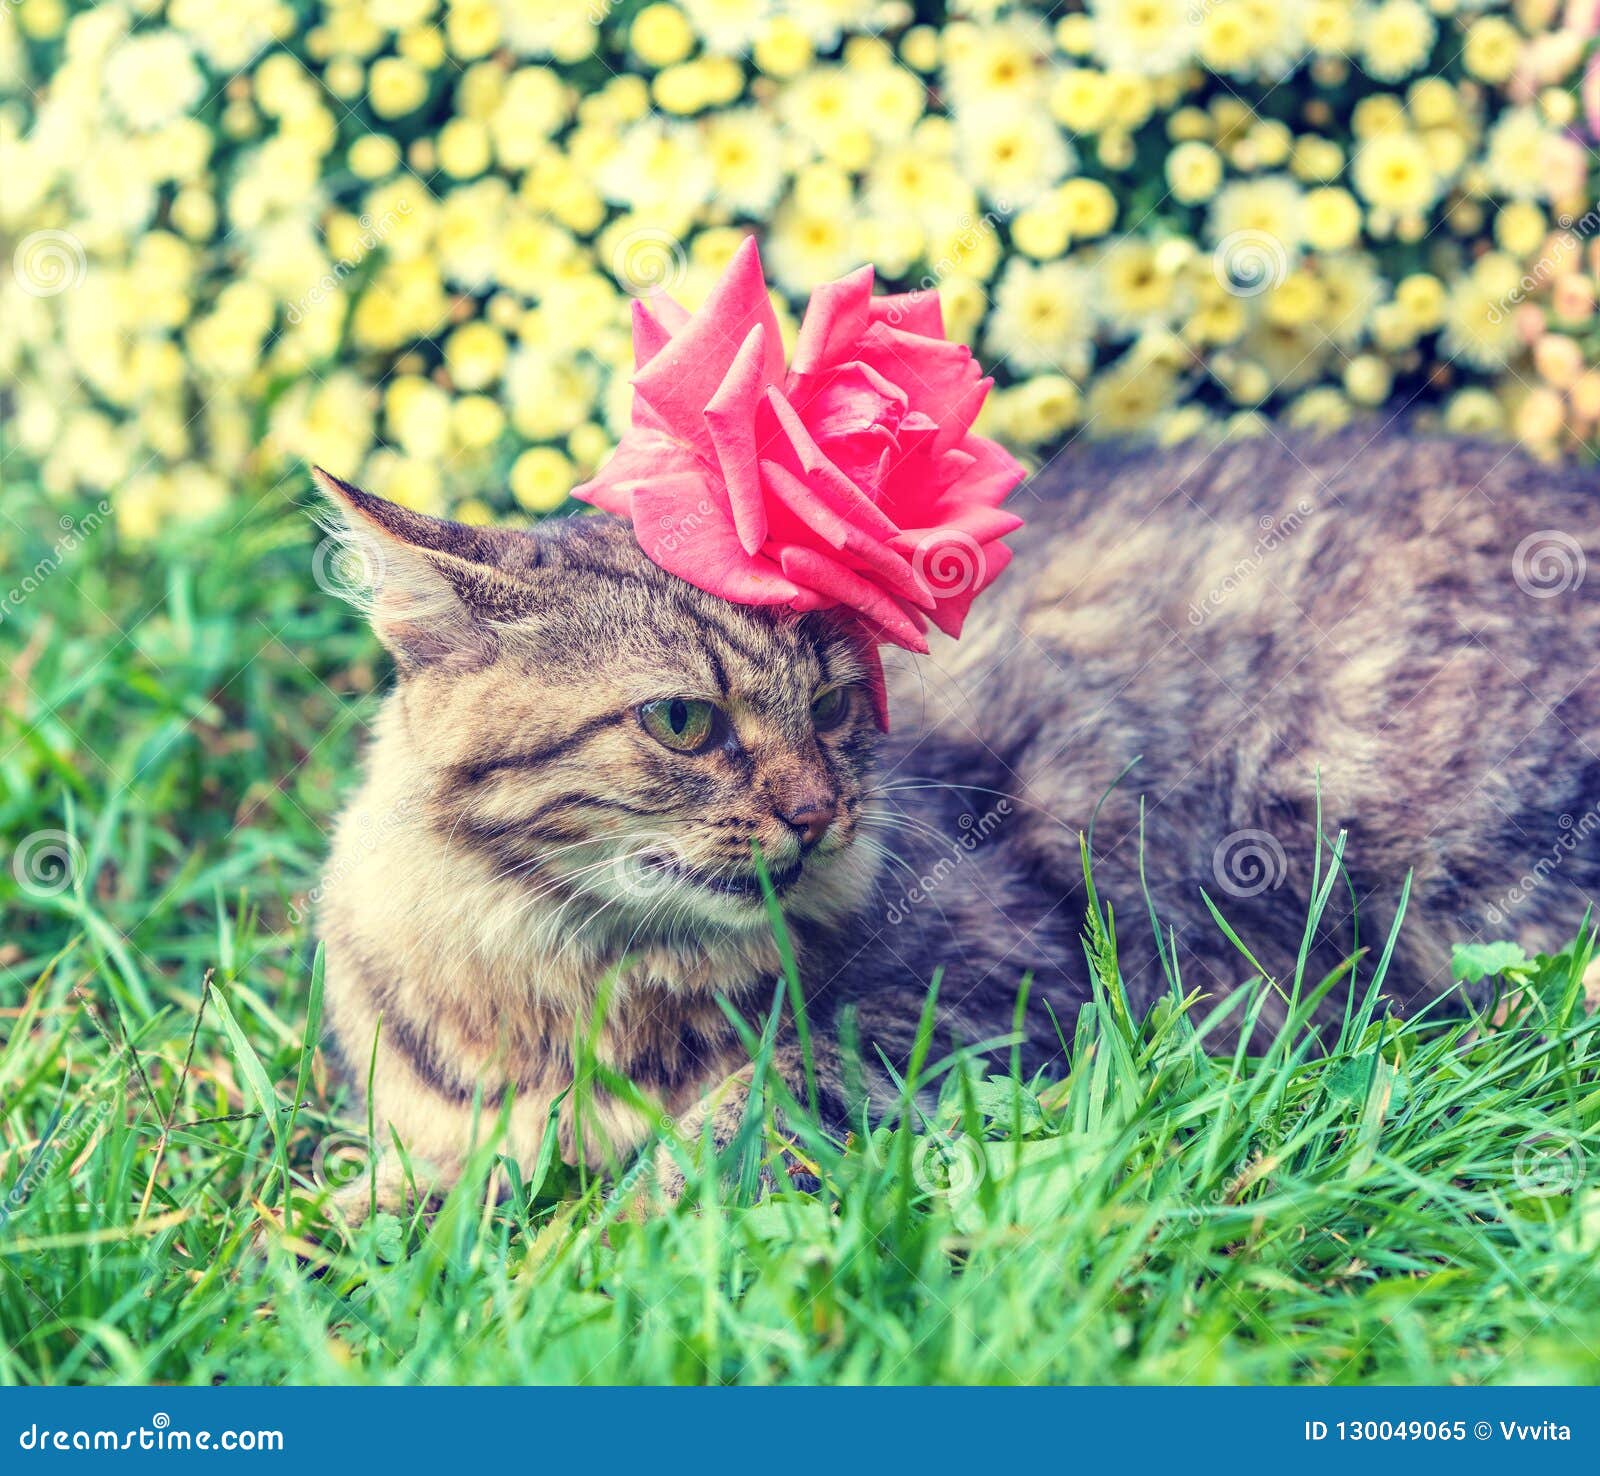 Siberian Cat With Flower On The Head Stock Image Image of beautiful